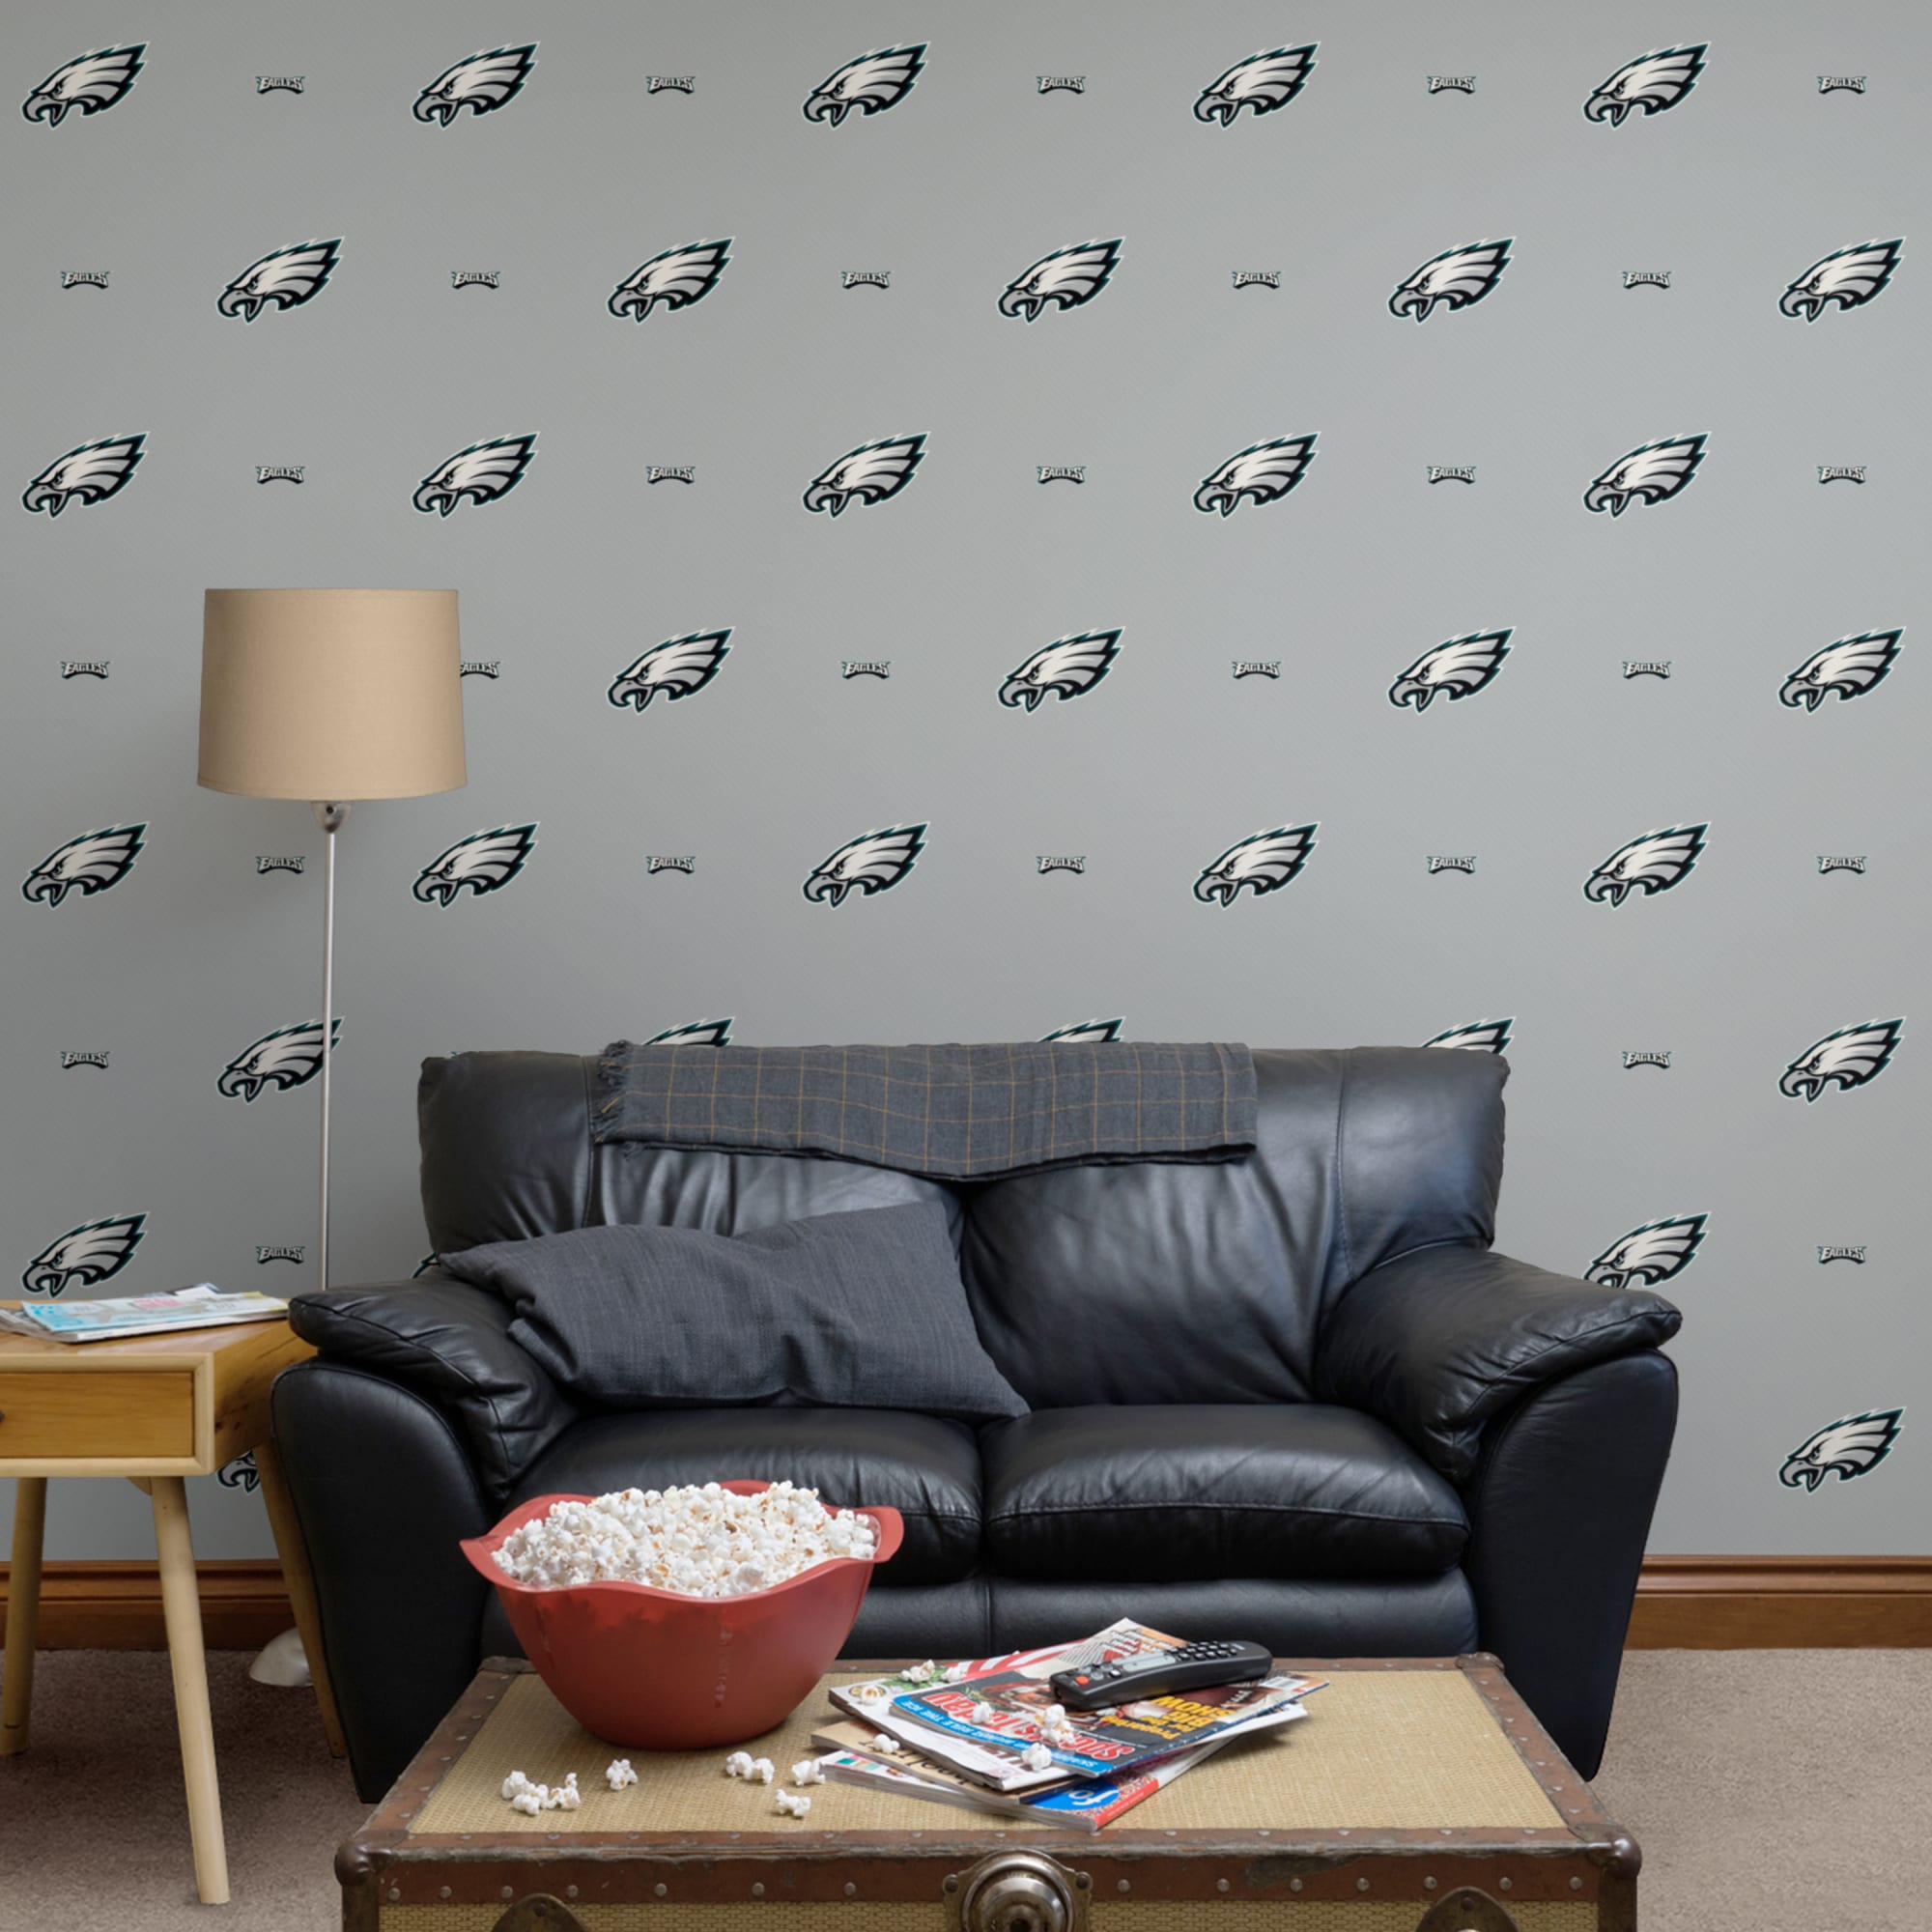 Philadelphia Eagles: Line Pattern - Officially Licensed NFL Removable Wallpaper 12" x 12" Sample by Fathead